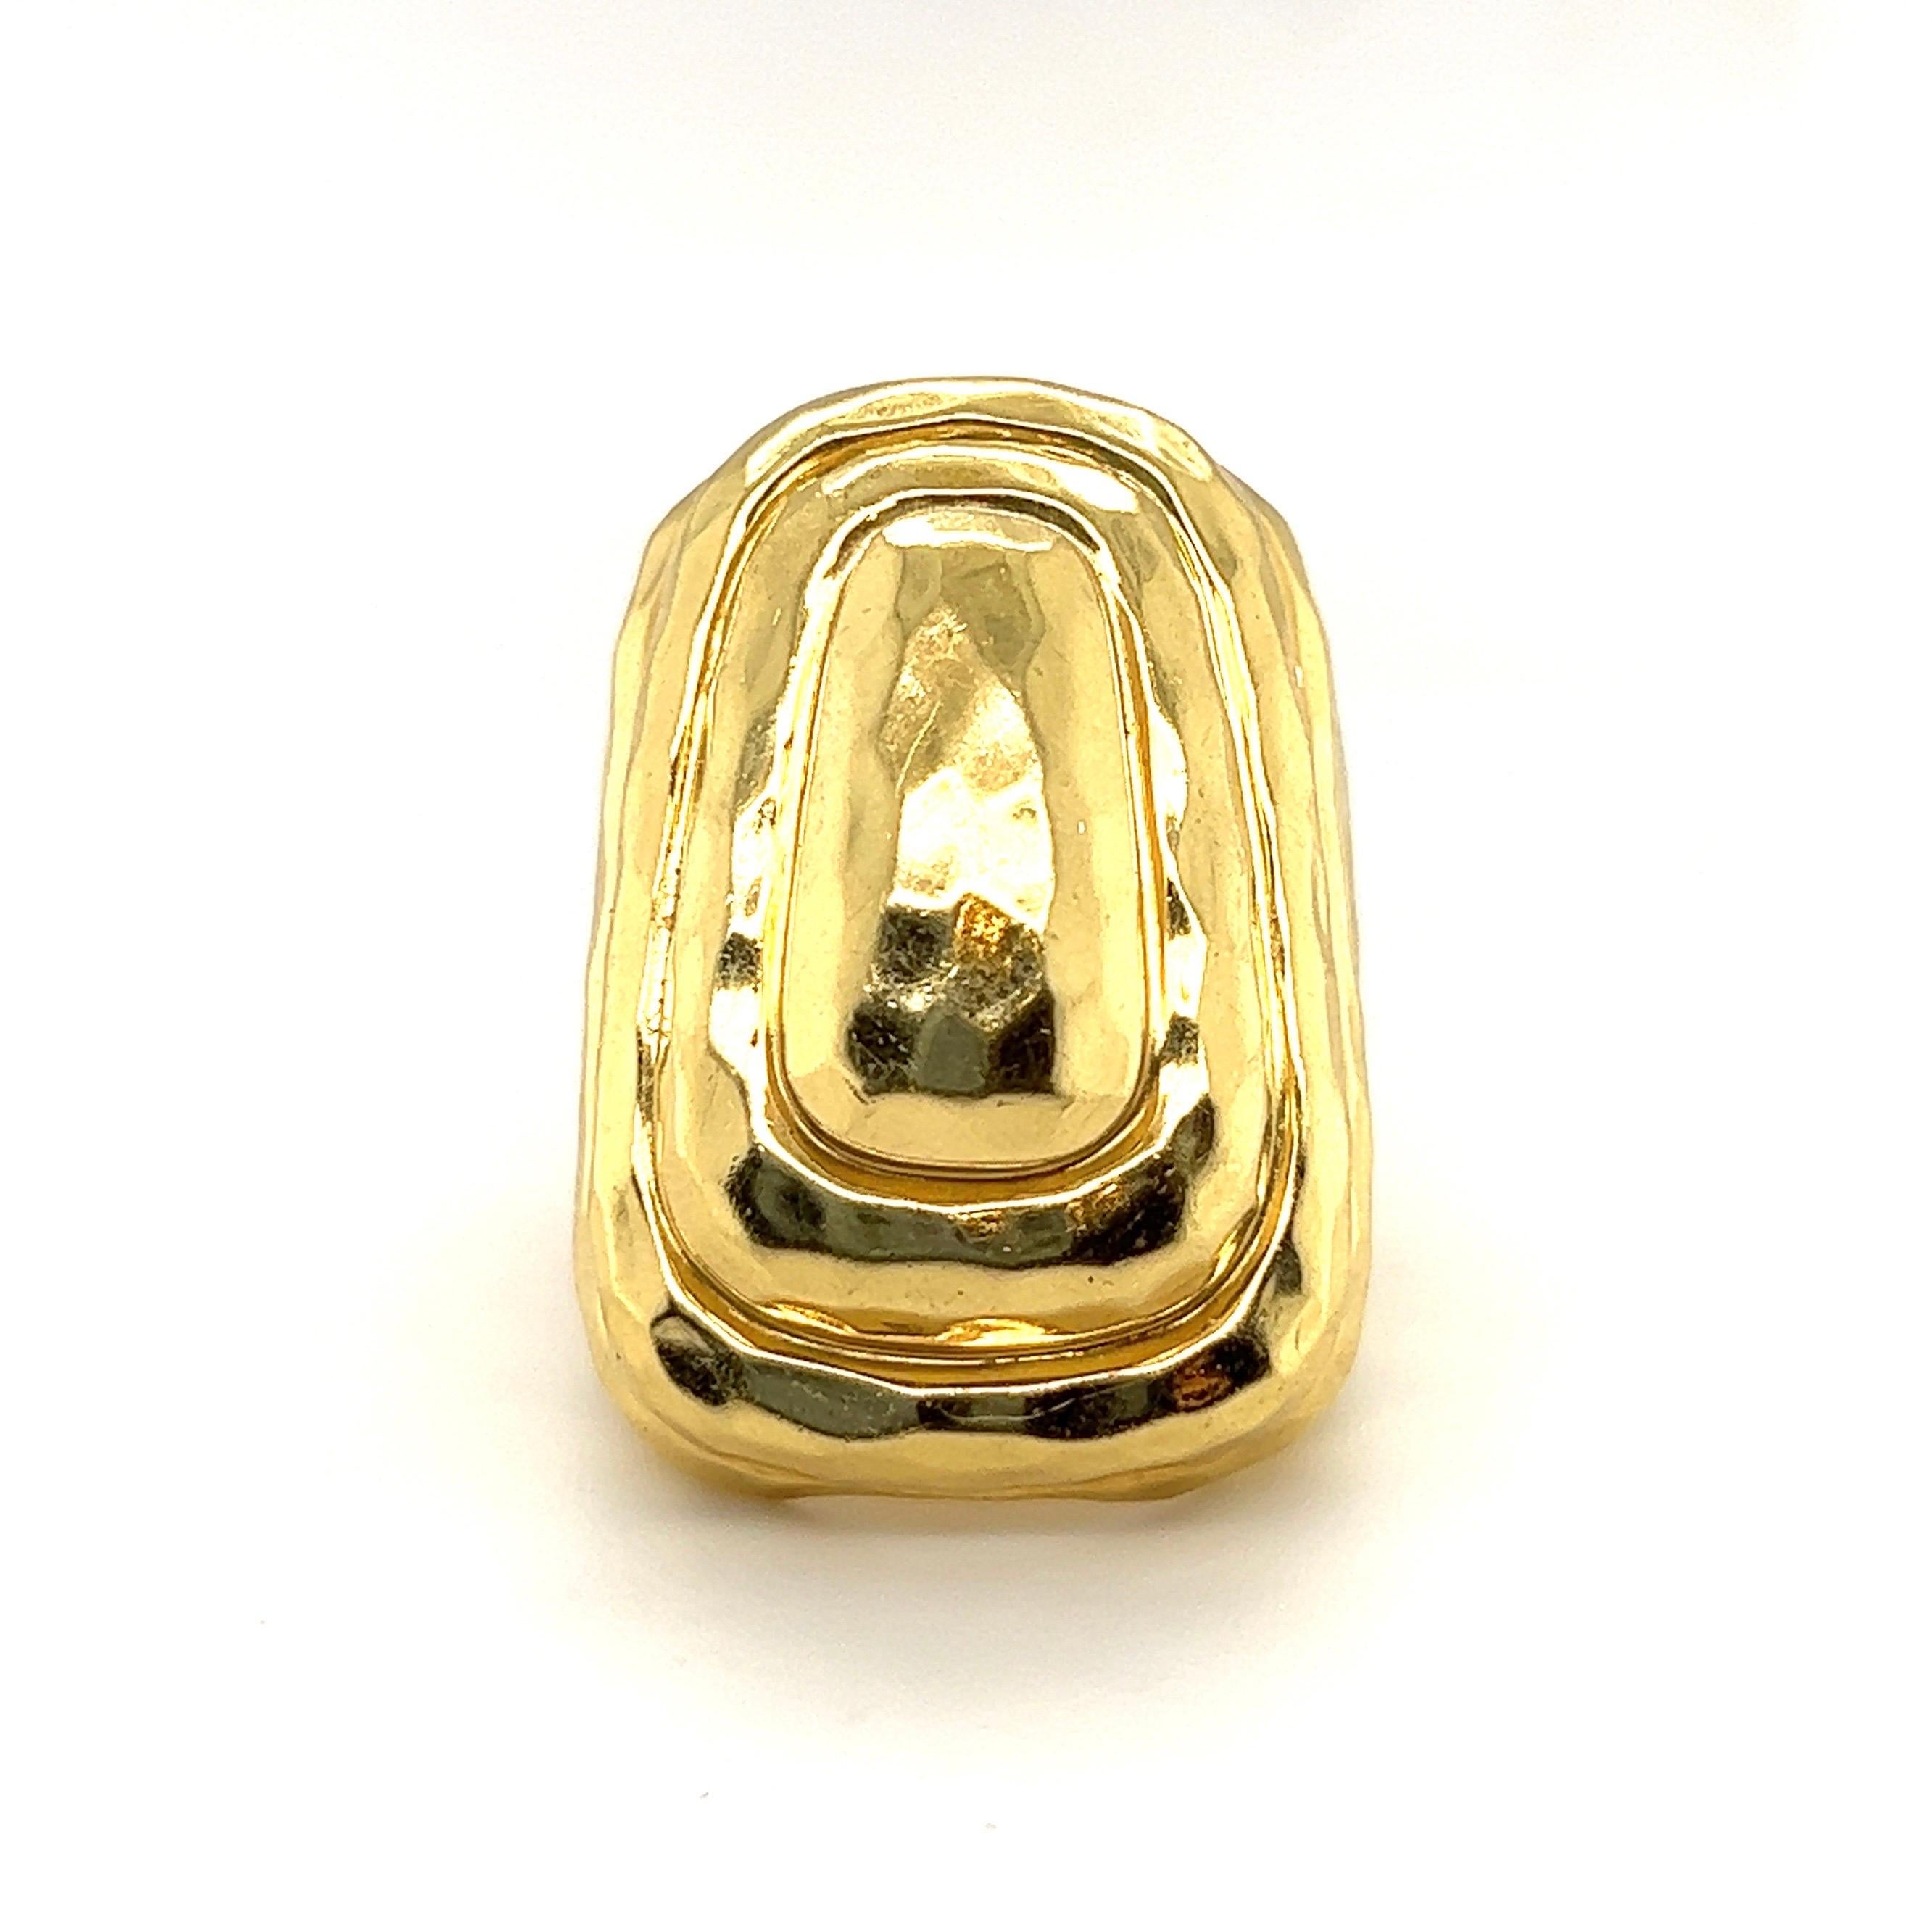 Fabulous 18 karat yellow gold cocktail ring by American jewelry designer Henry Dunay, circa 1980s.

Entirely crafted in 18 karat hammered yellow gold, this statement ring is designed as a bold step pyramid.
Henry Paul Dunay (1935 – 2023) was an